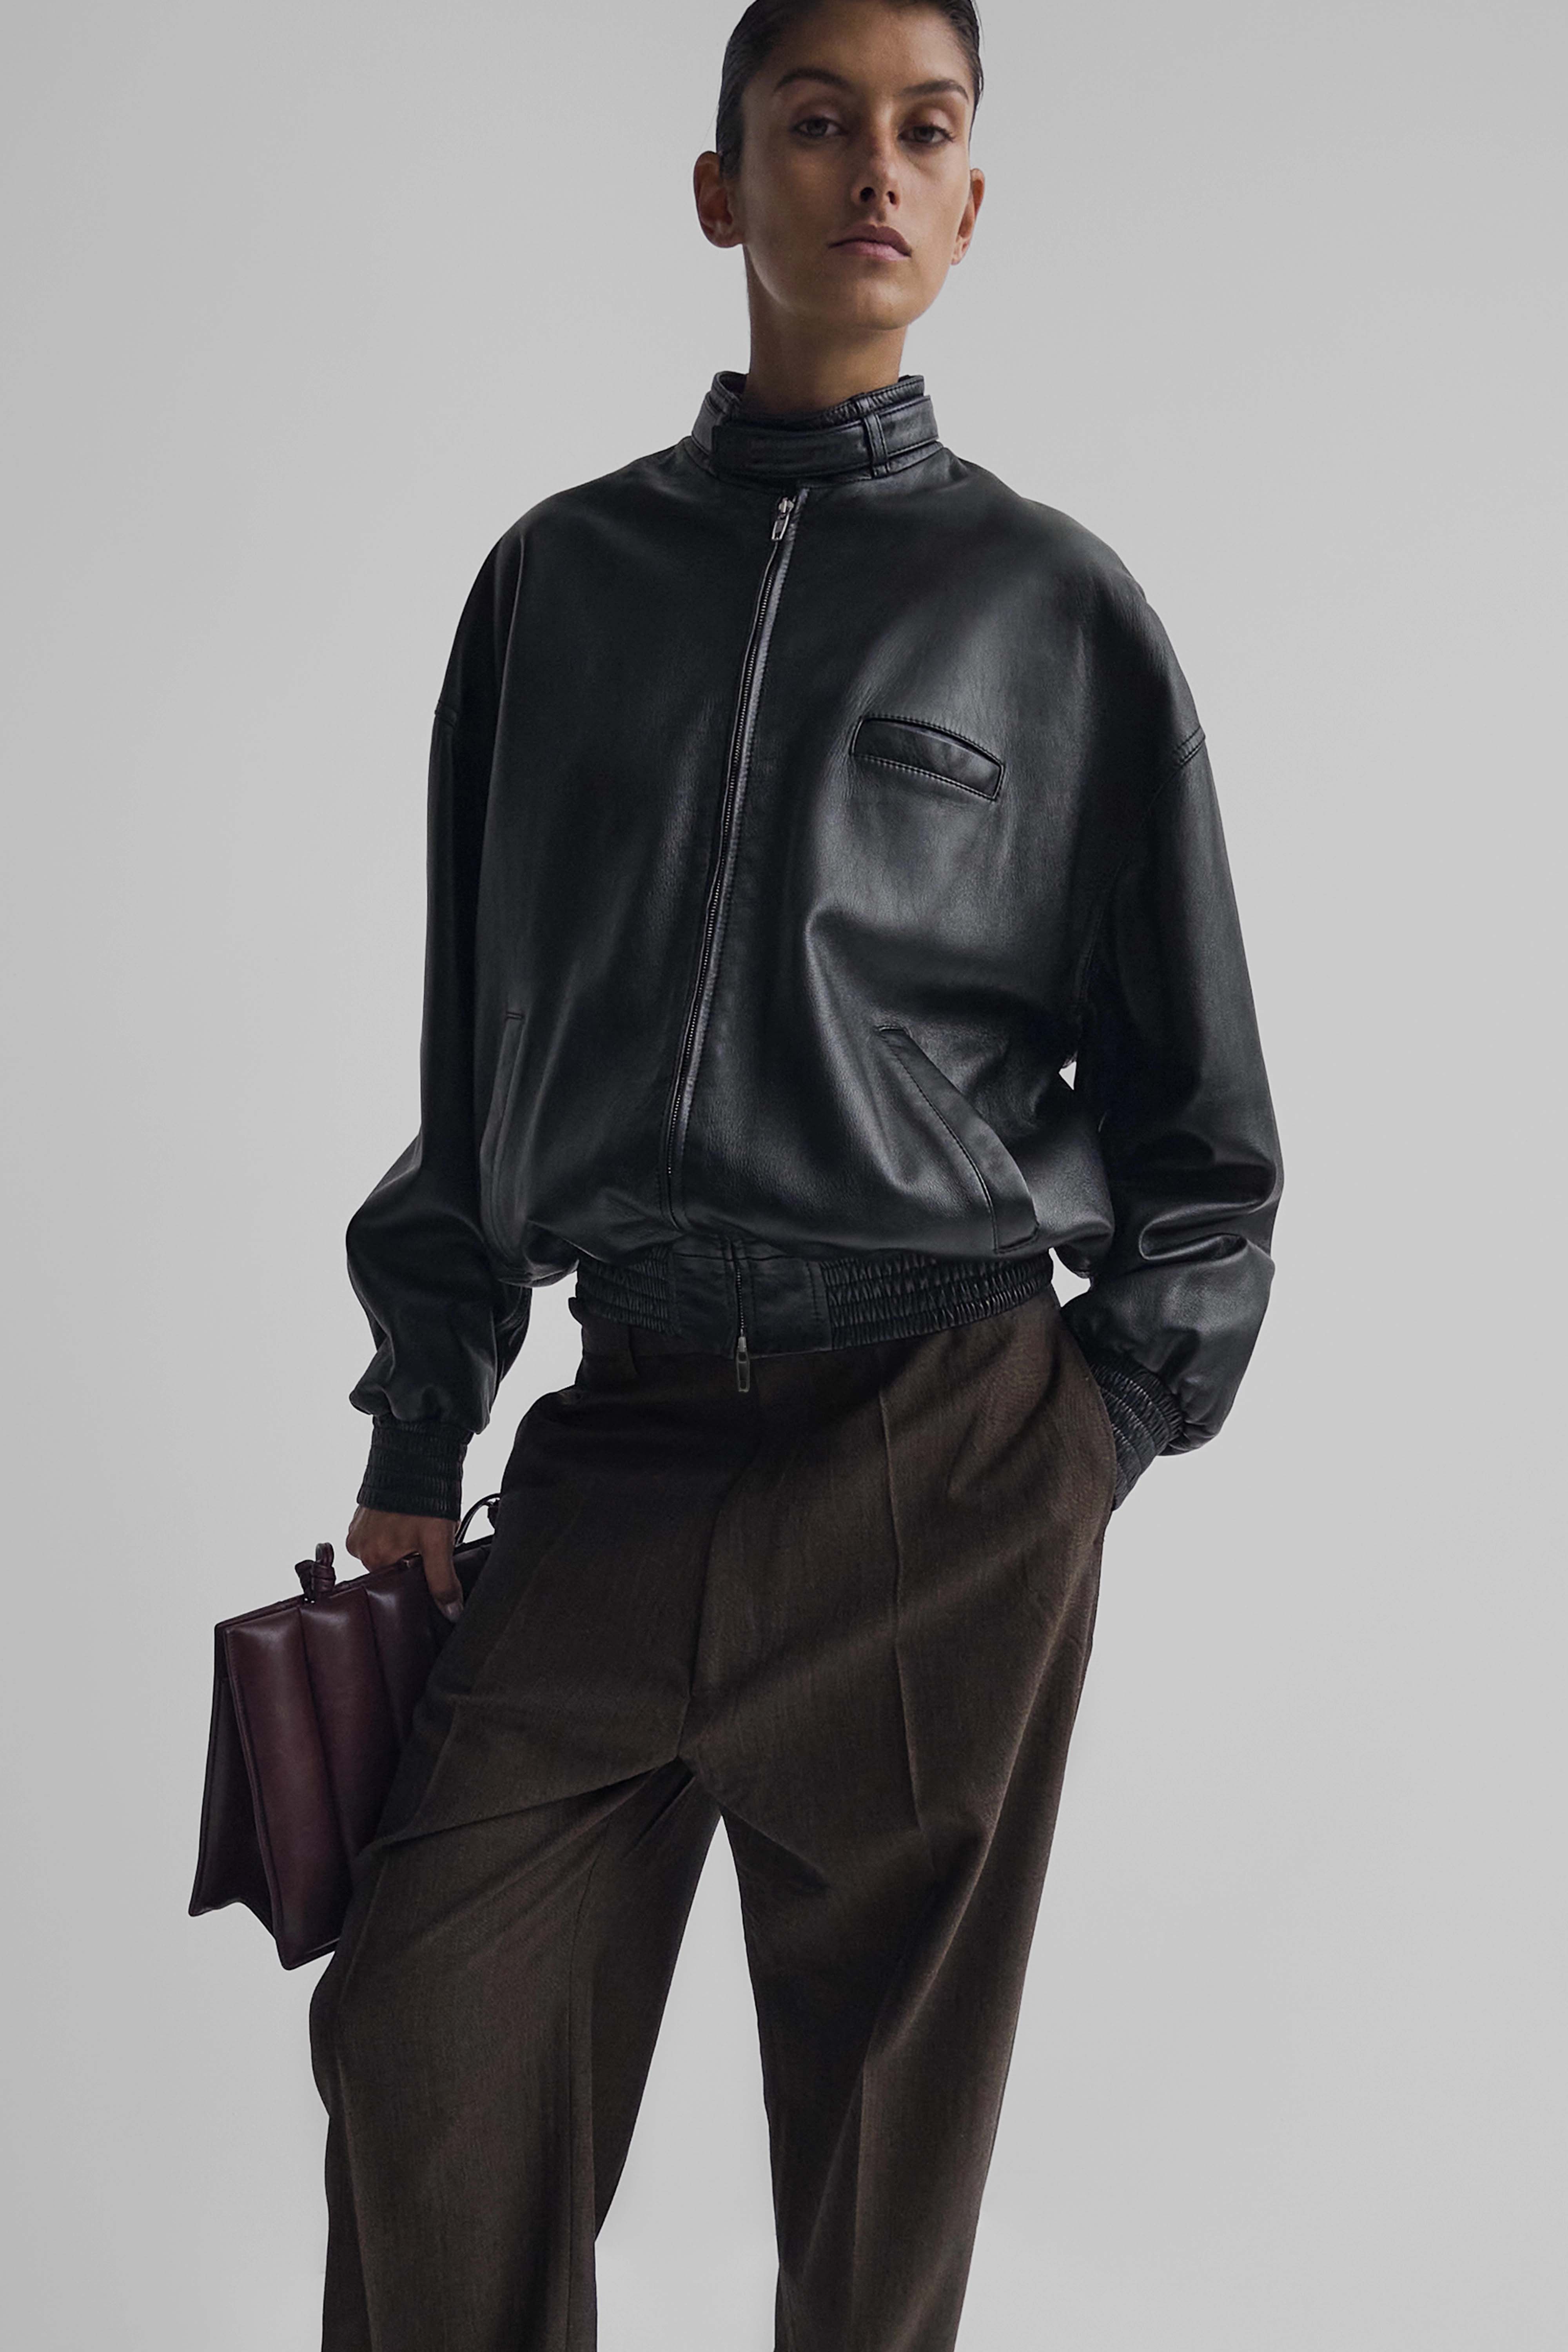 Phoebe Philo's Eponymous Brand's First Collection Has Dropped